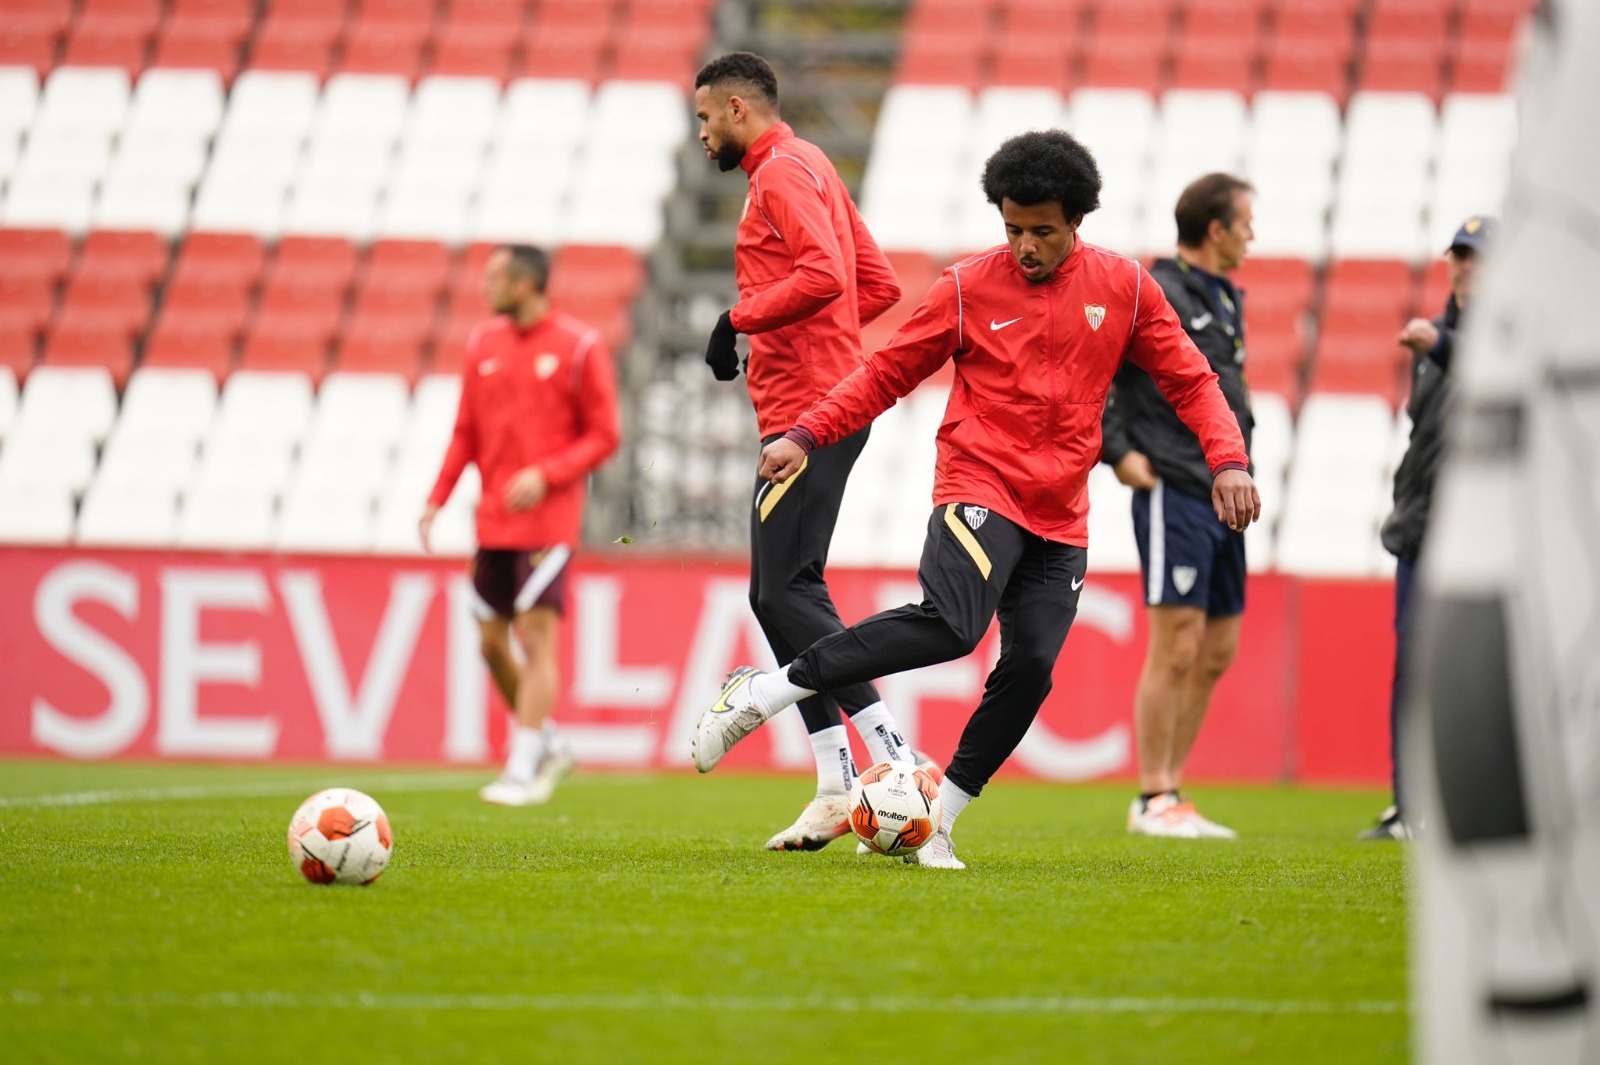 El Sevilla FC trained on Wednesday at the training ground